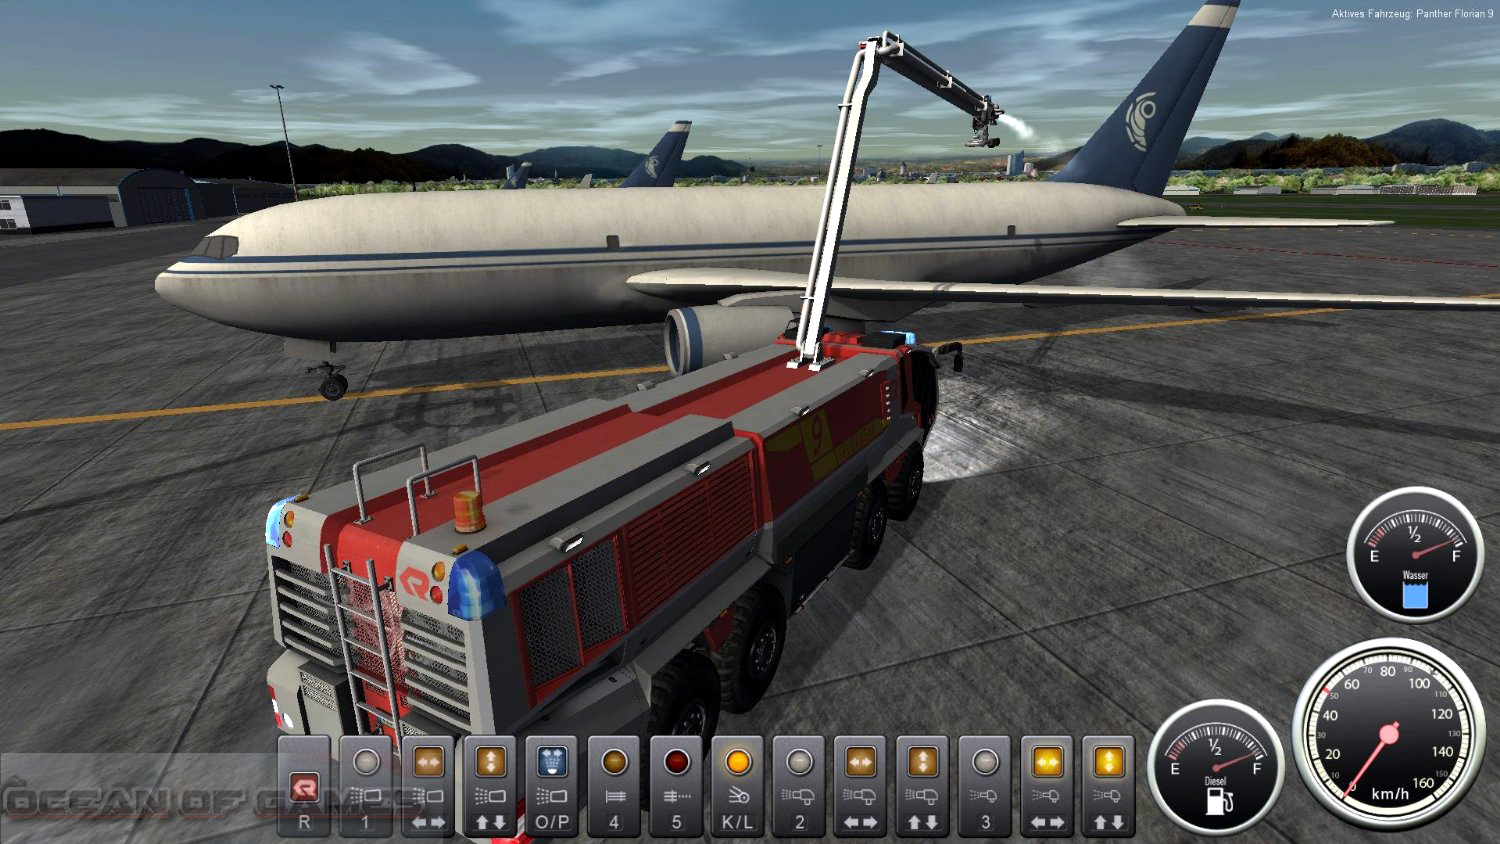 firefighter simulator download pc